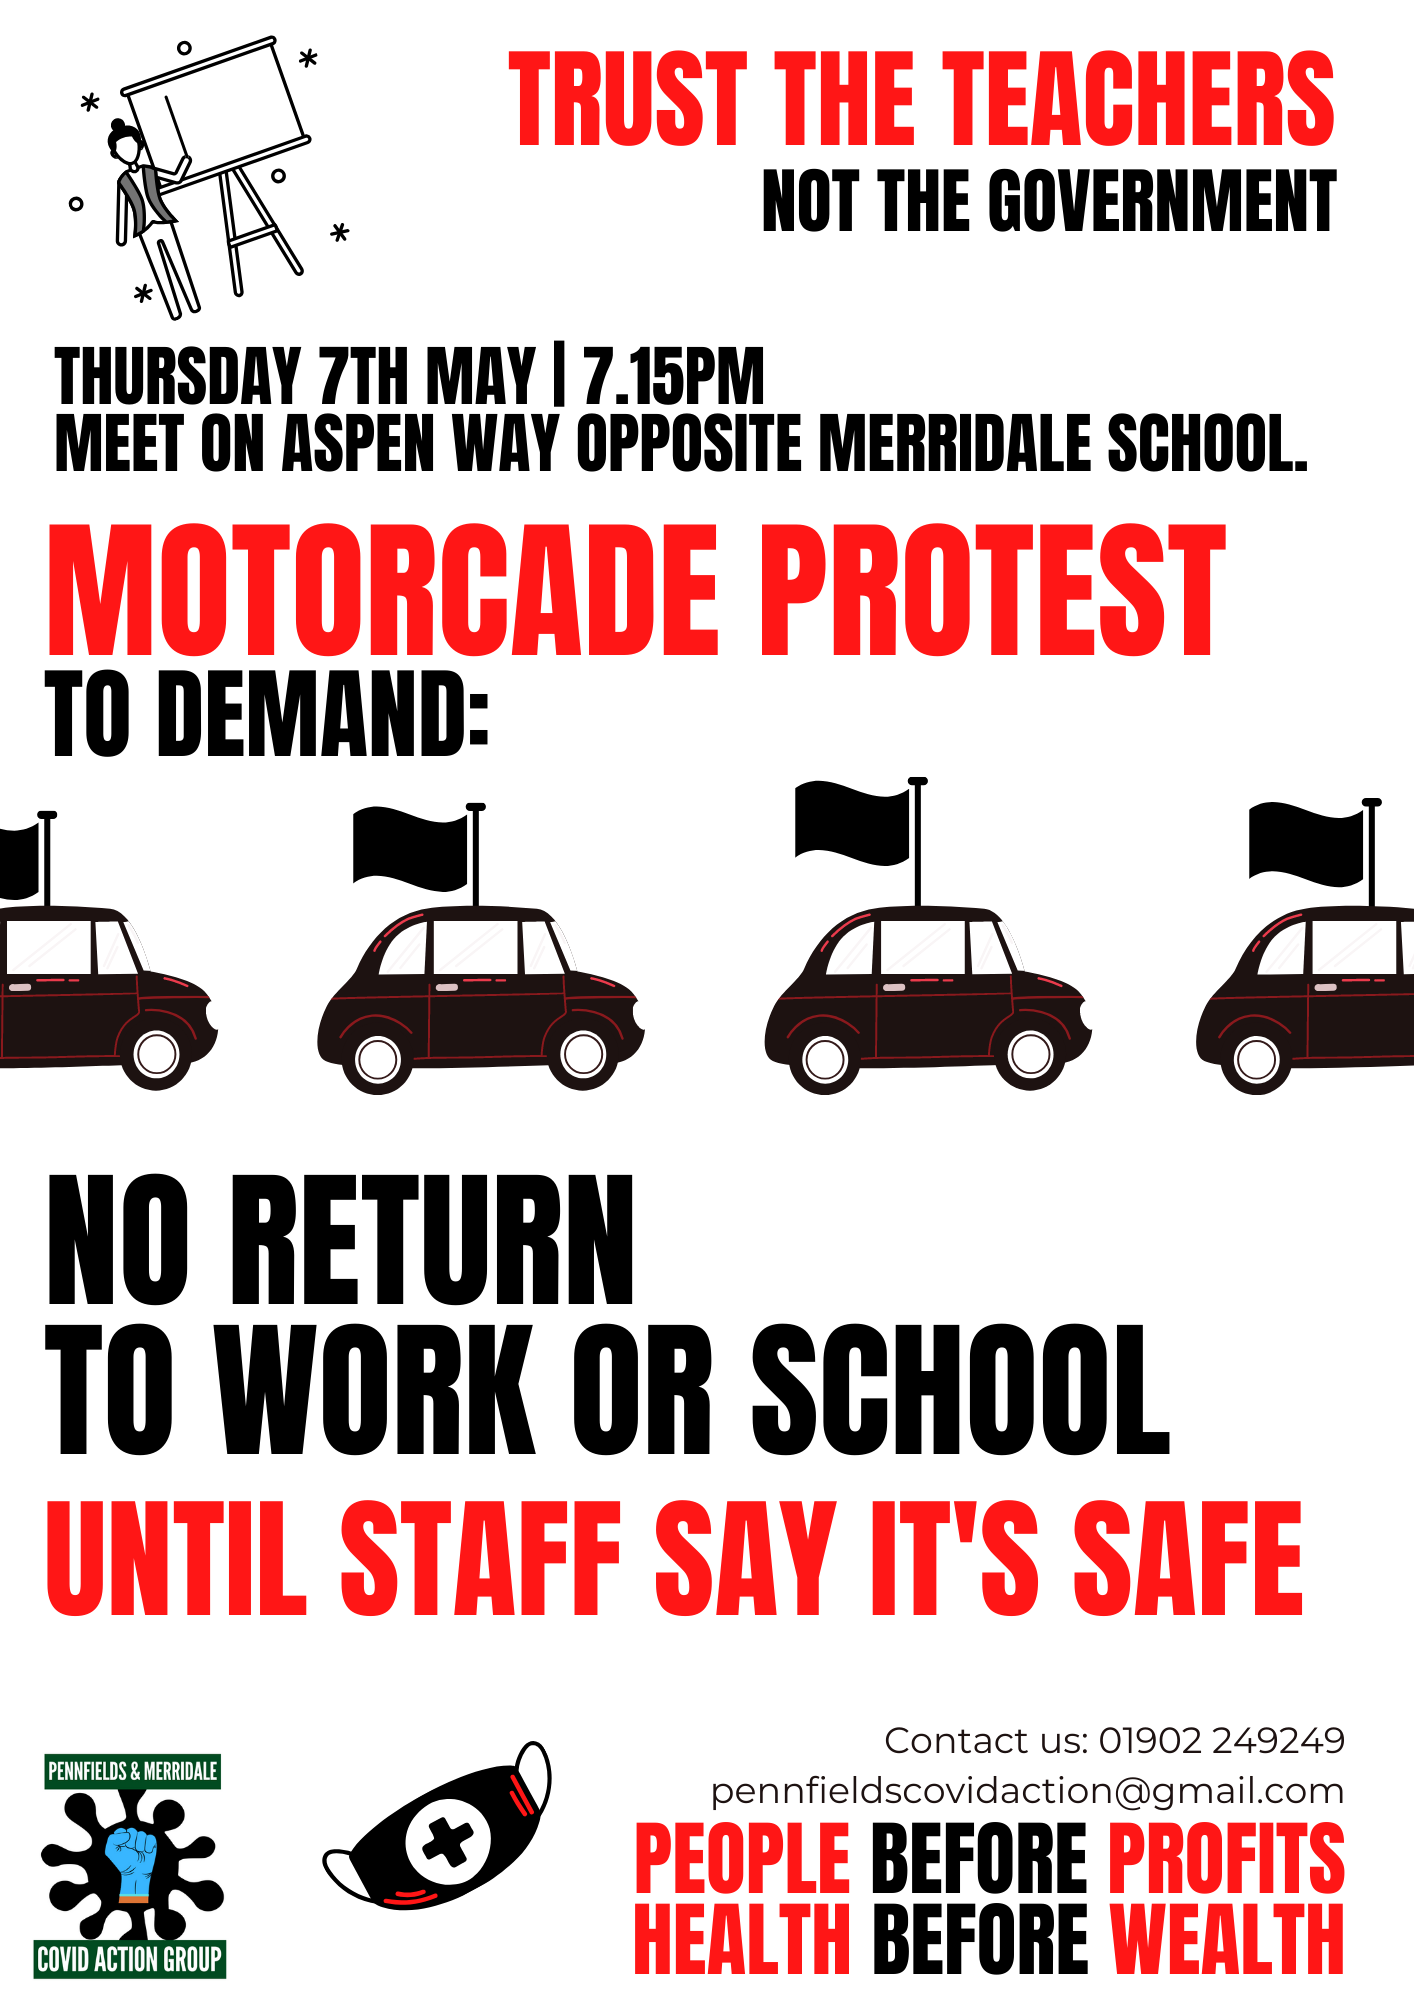 Why did the law stop our protest while allowing schools and workplaces to reopen?